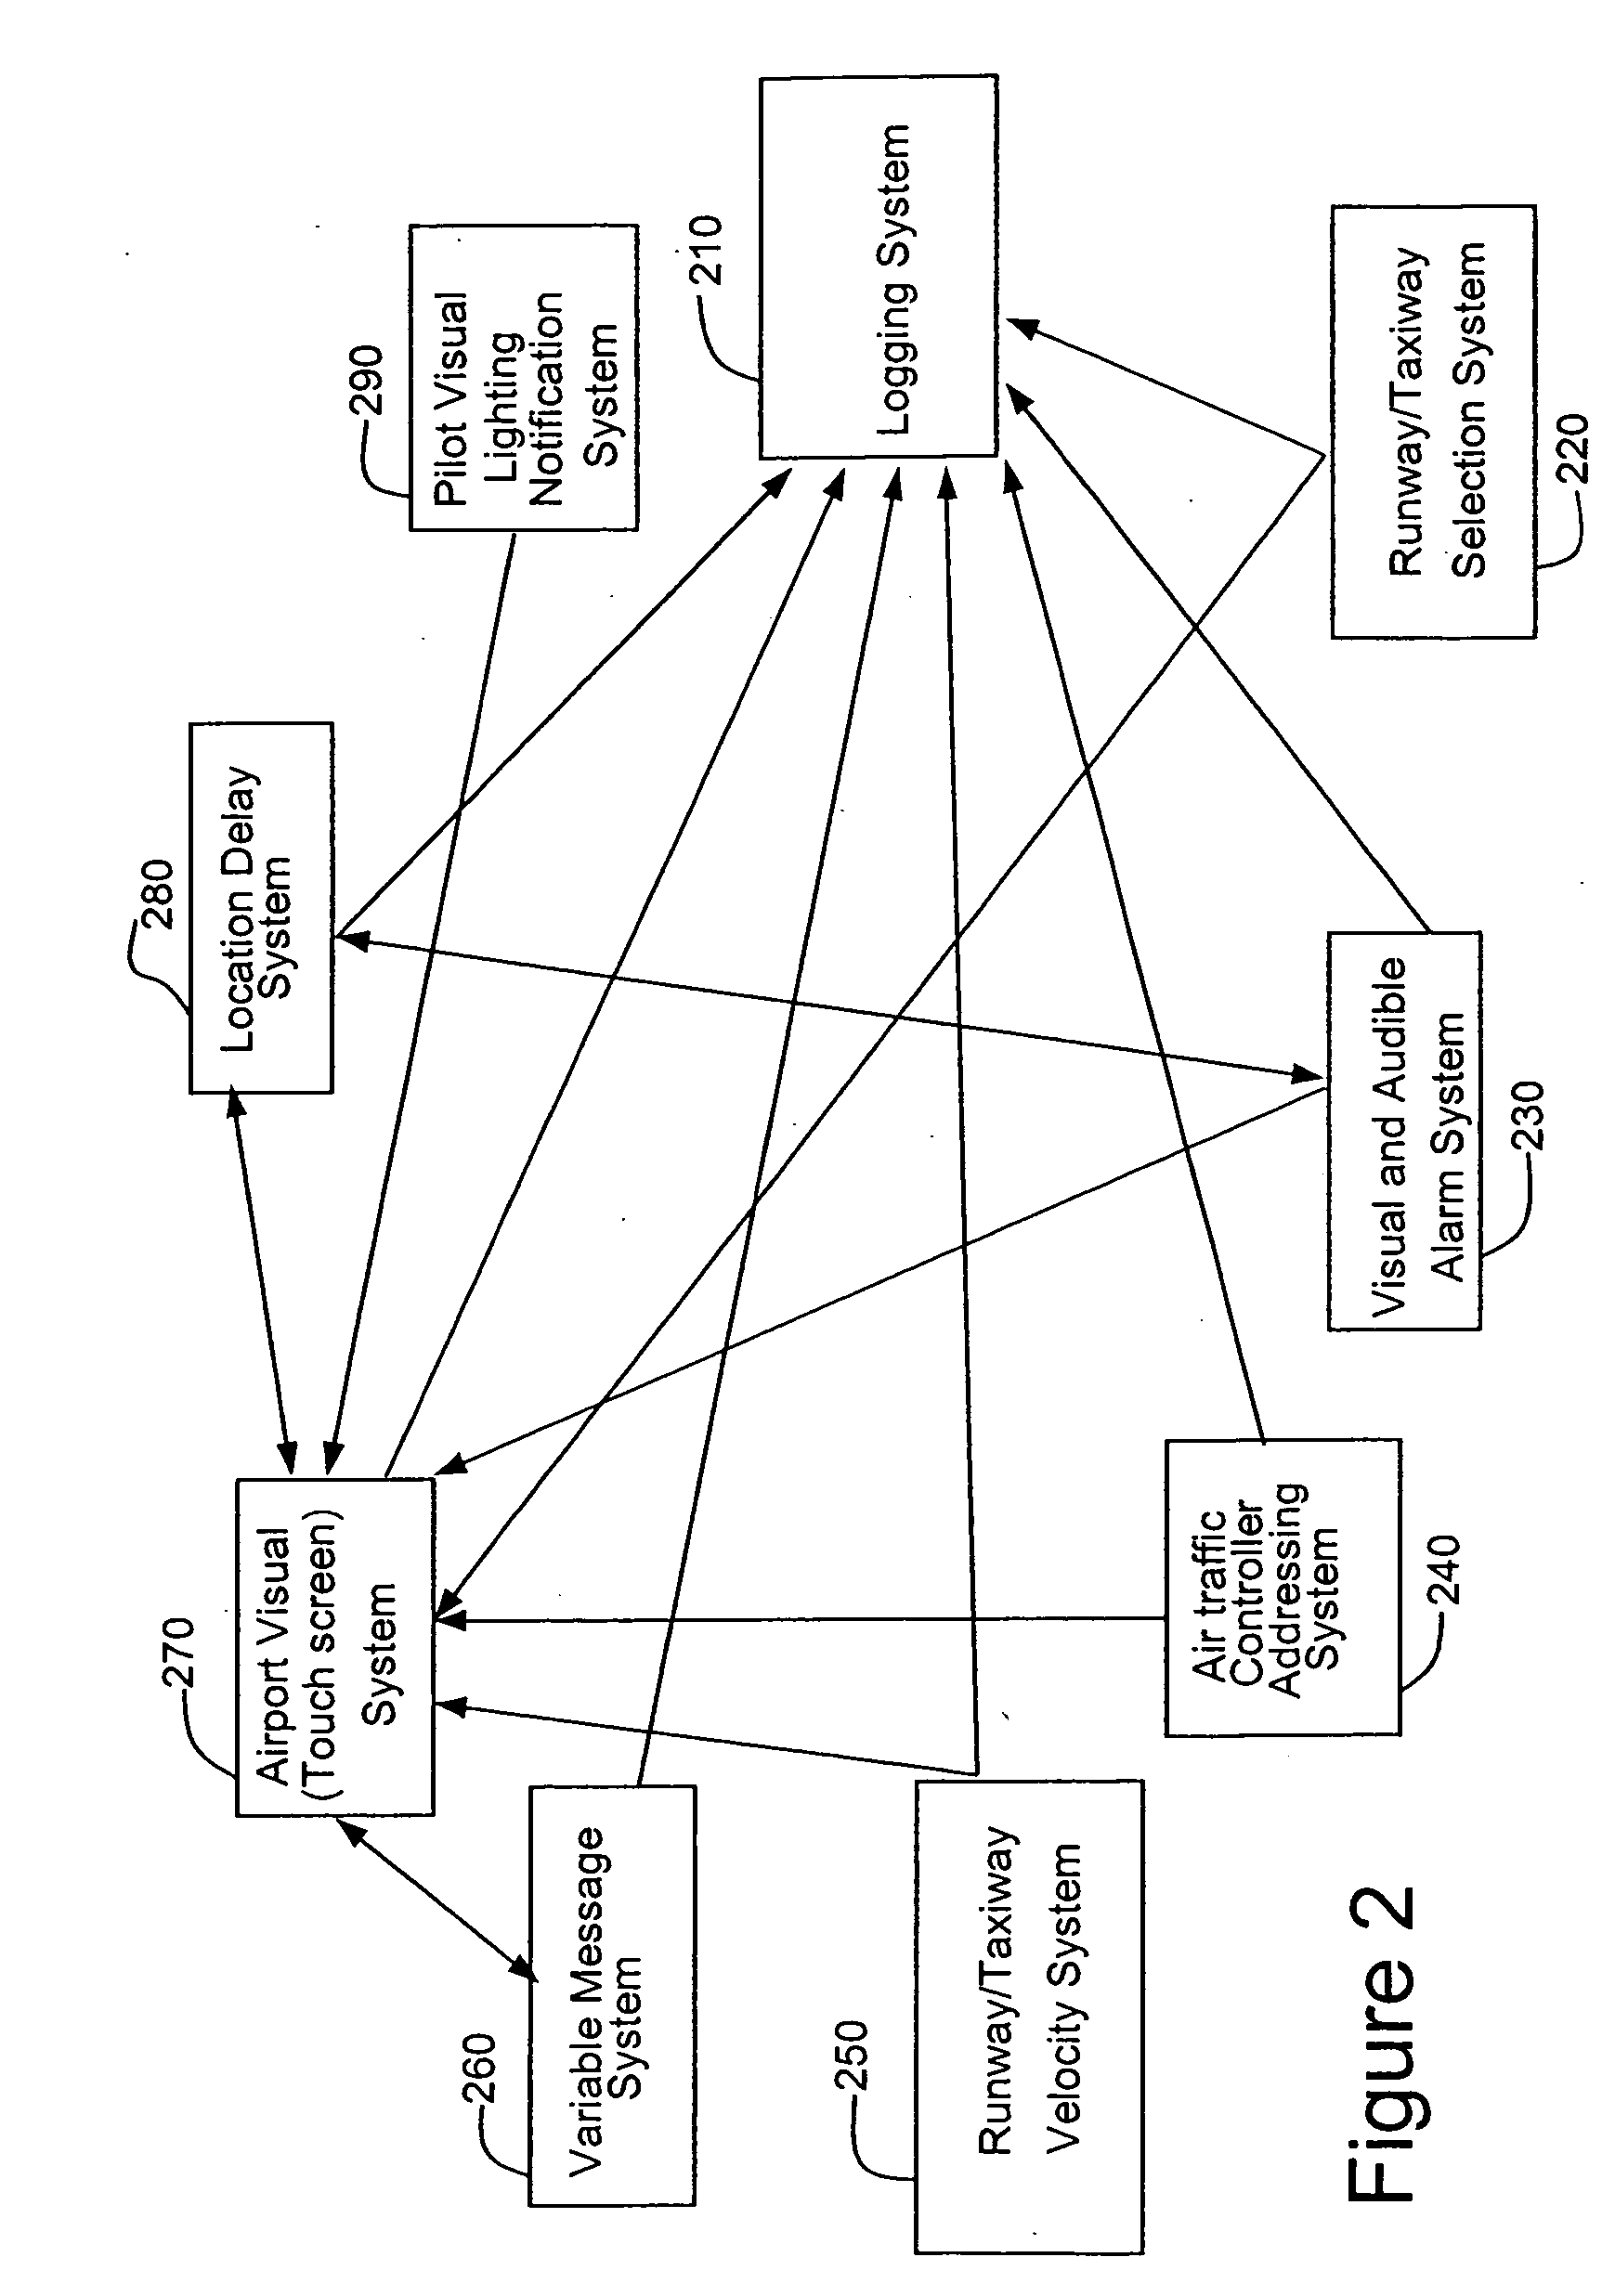 System for monitoring vehicle and airplane traffic on airport runways